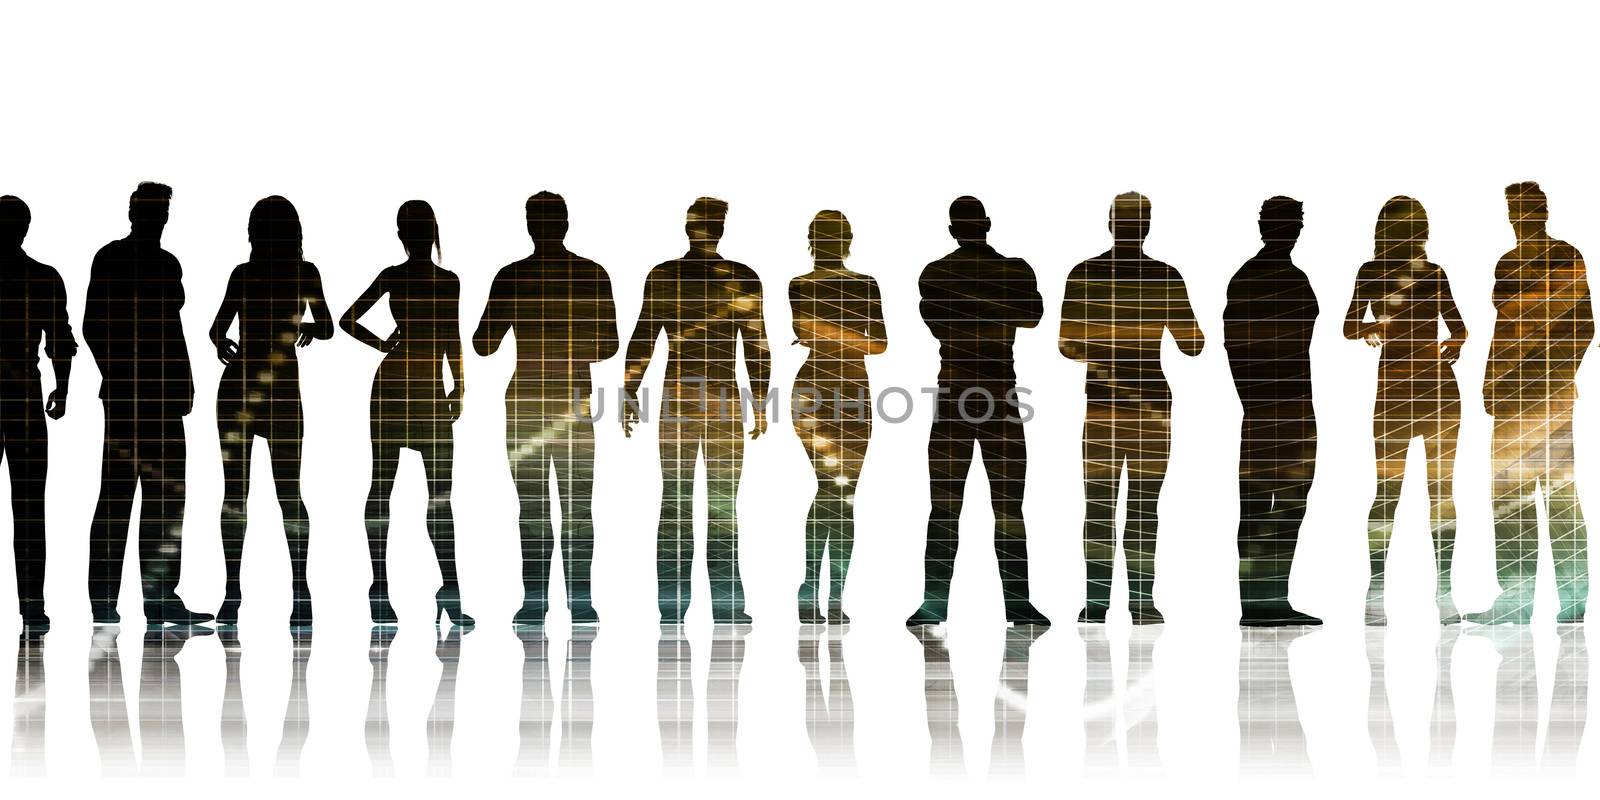 Business People Standing as a Corporate Silhouette Concept